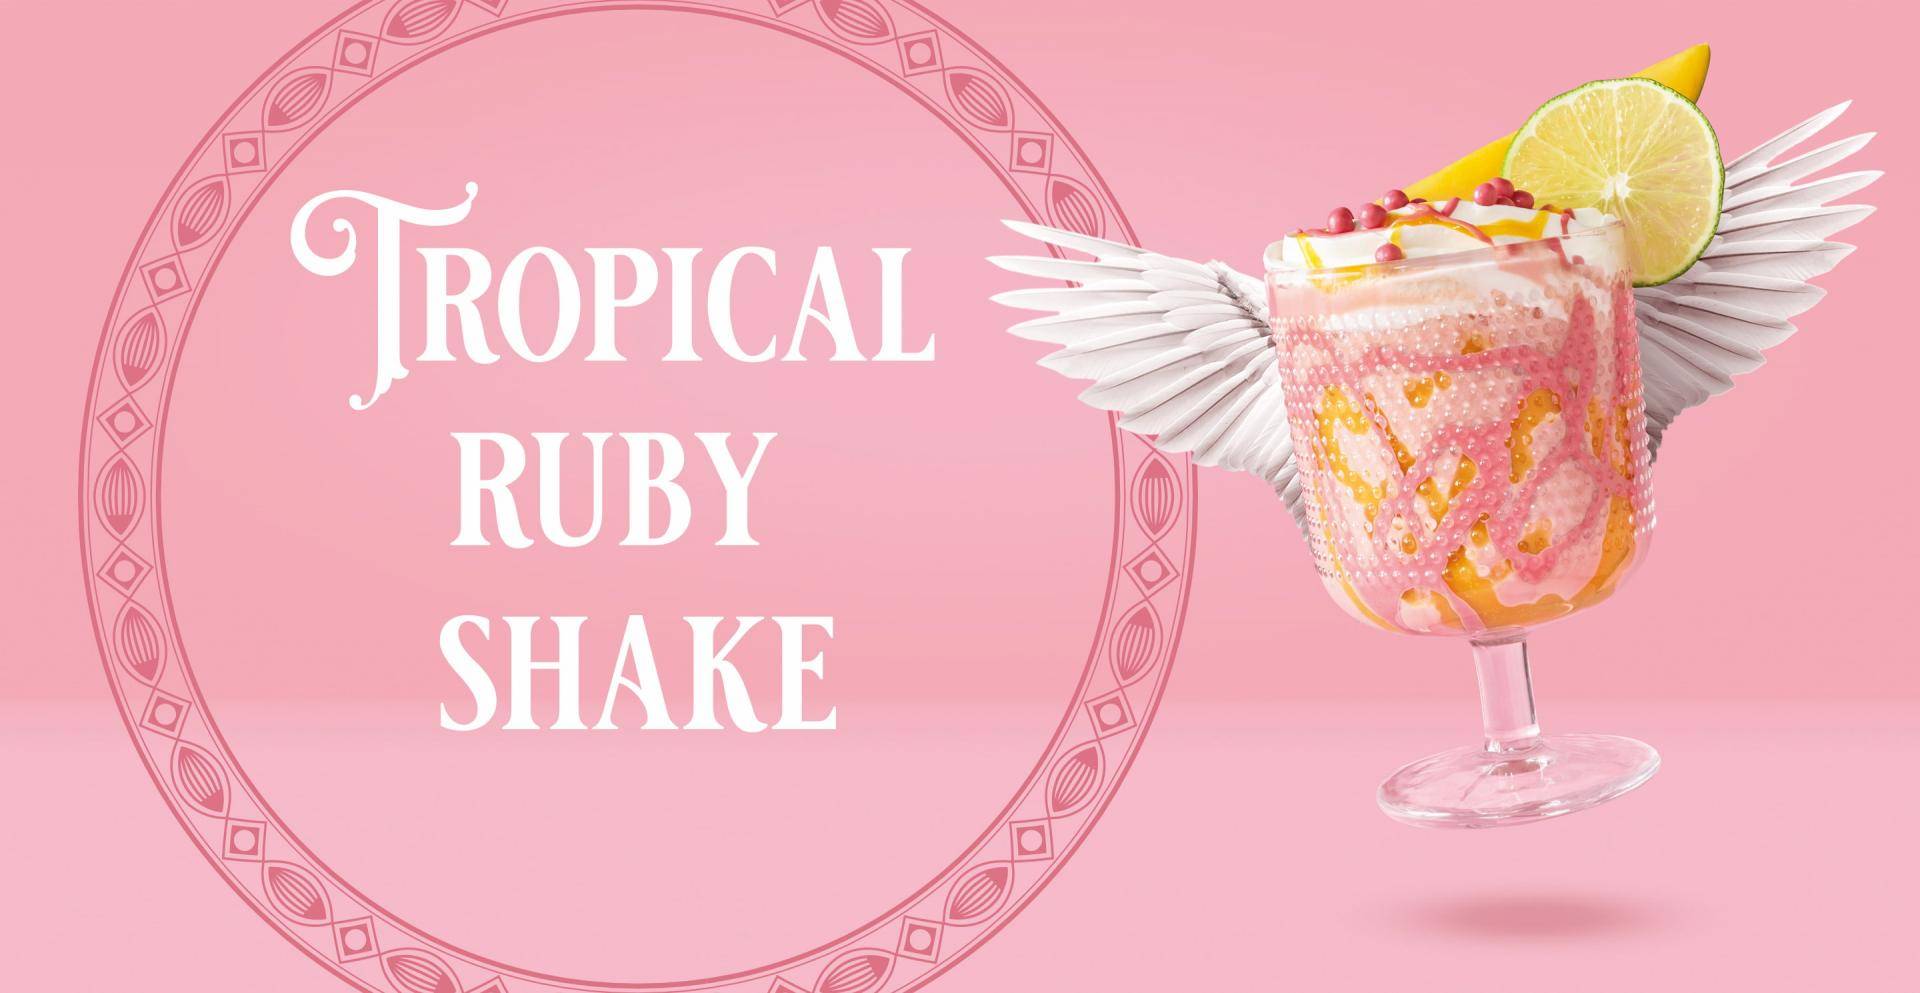 Ruby Launch website recipes tropical